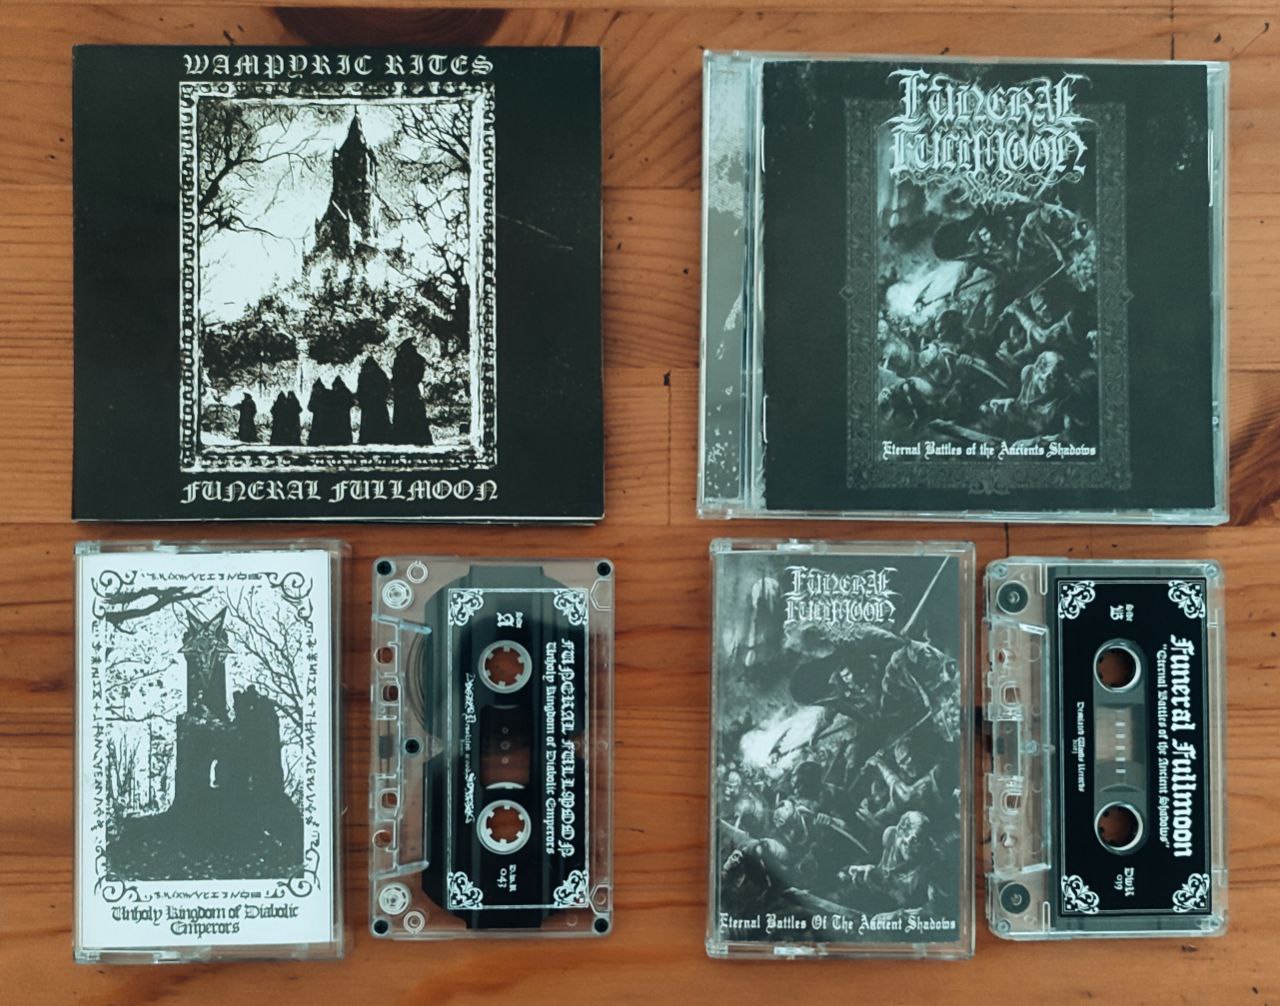 Funeral Fullmoon  BUNDLE: 2 CDs + 2 Pro tapes